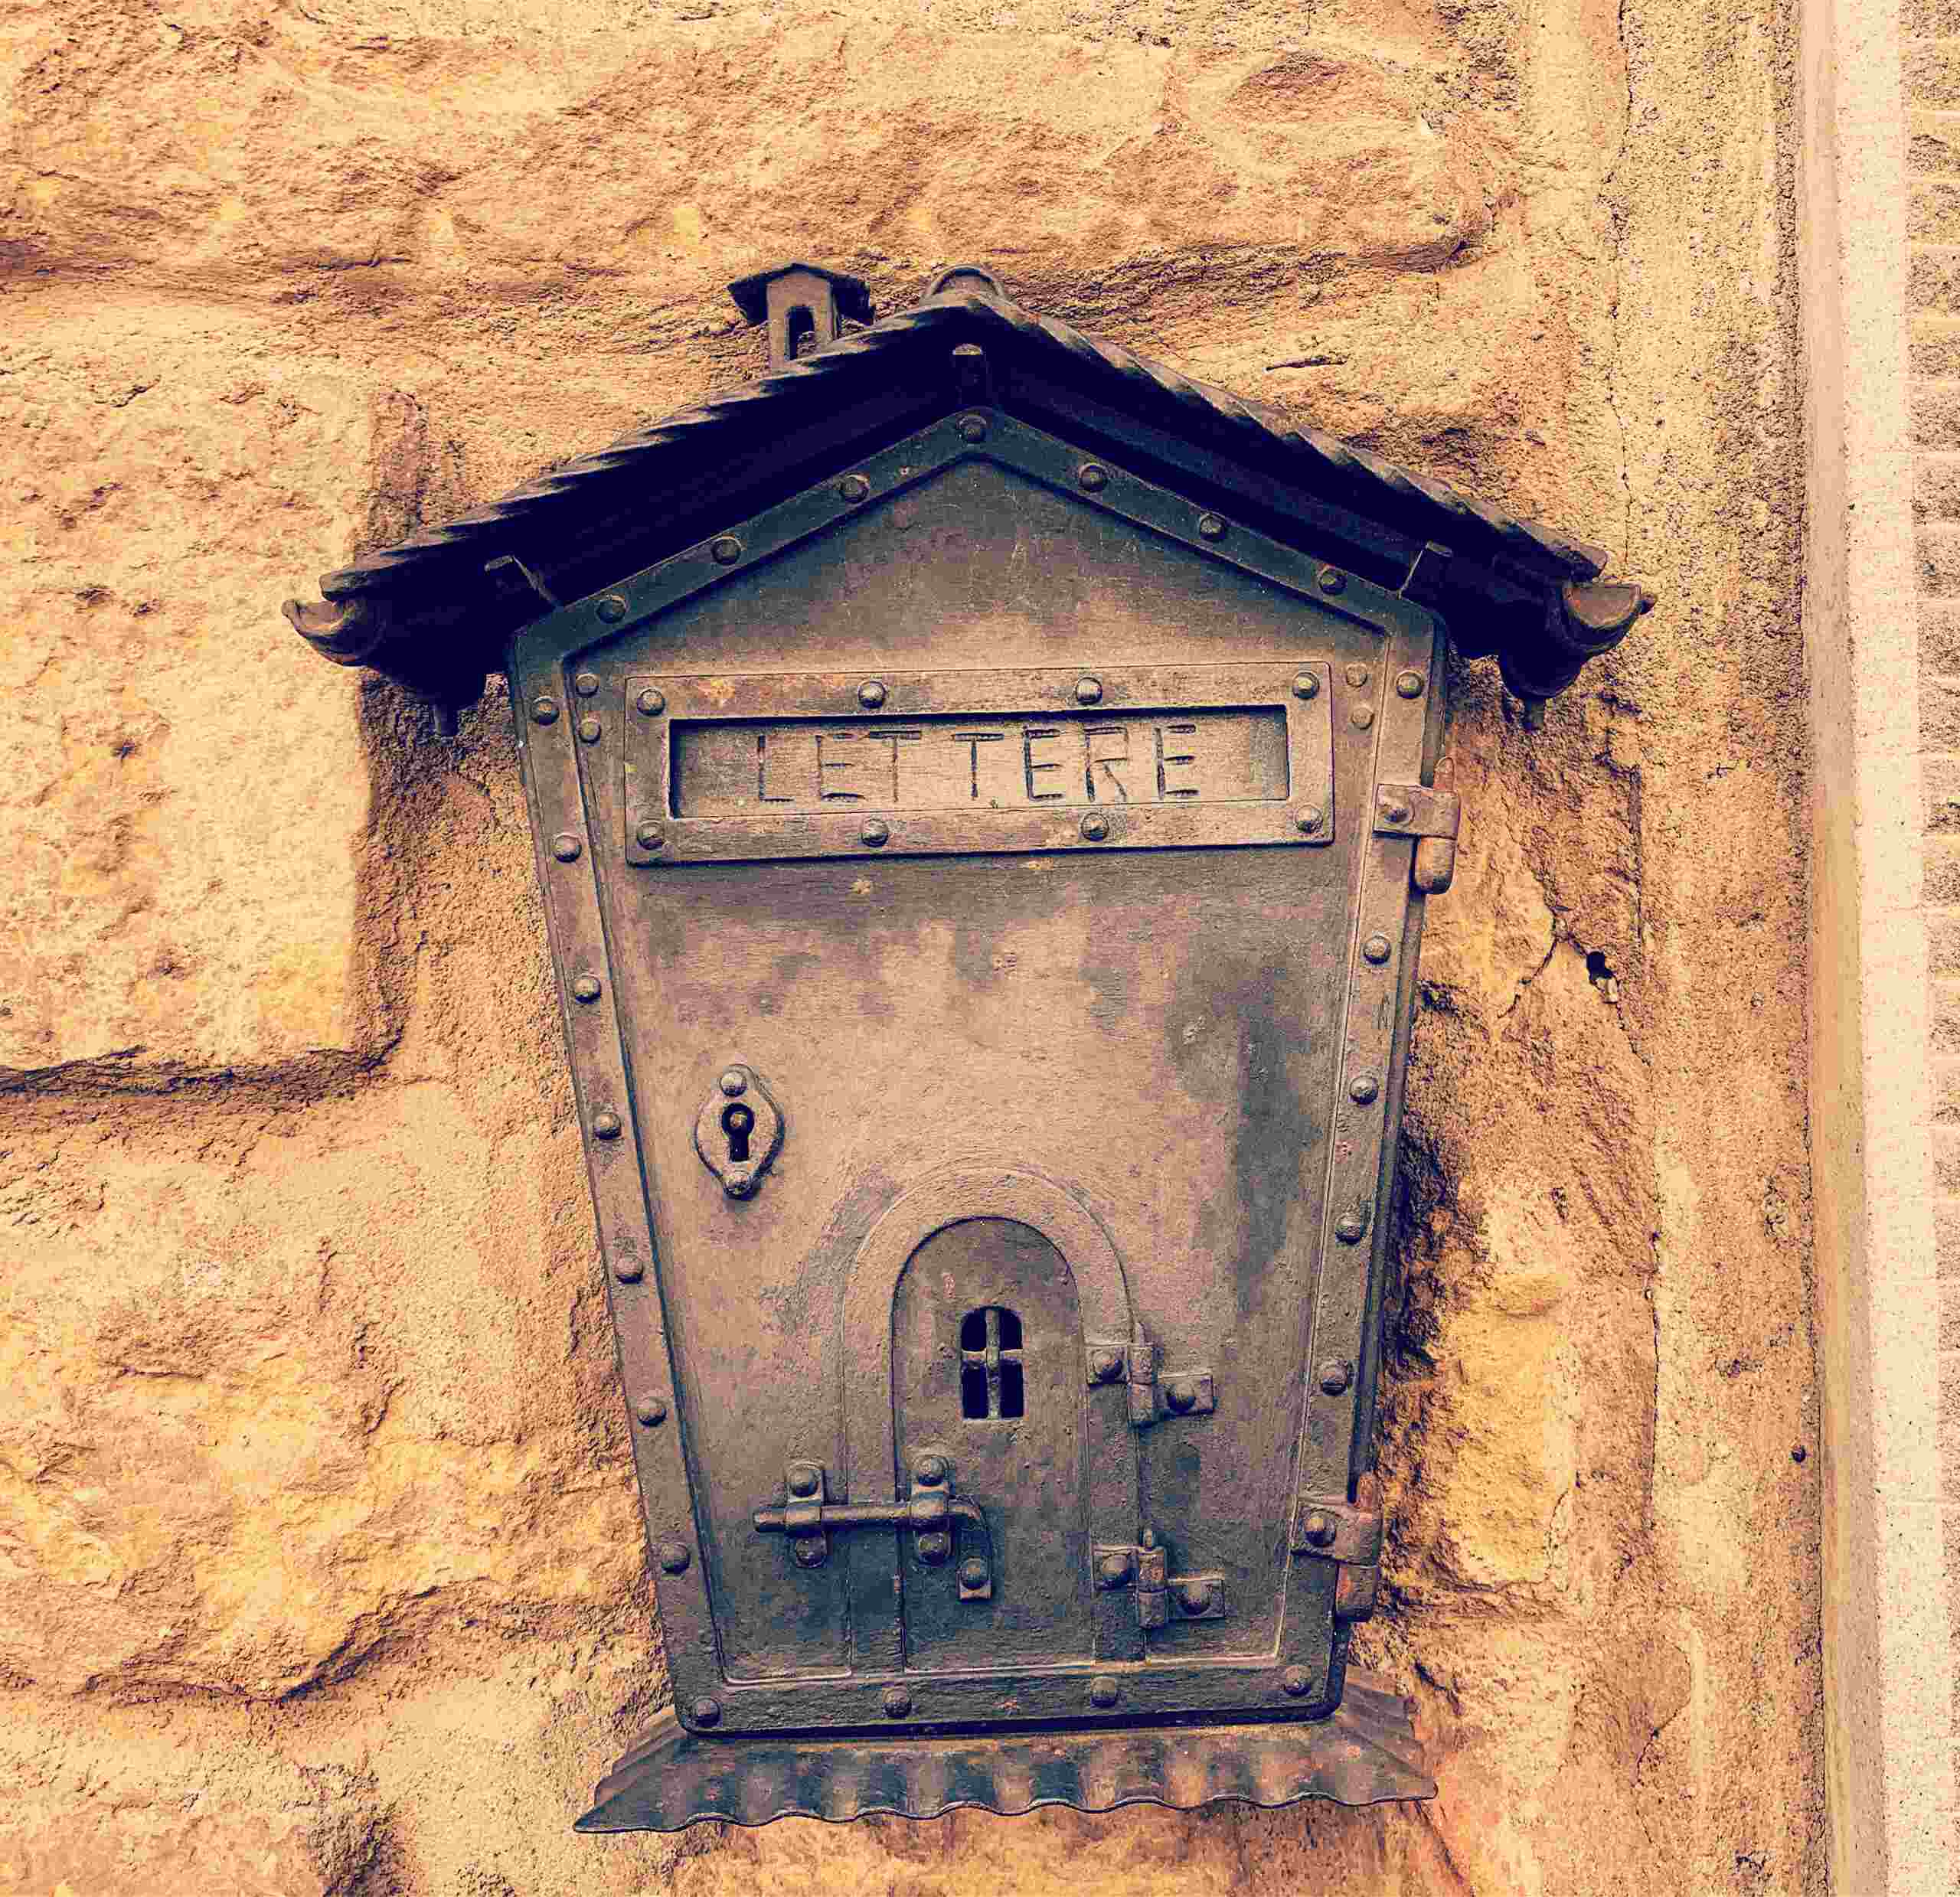 A Wooden Letter Box Fixed on the Wall